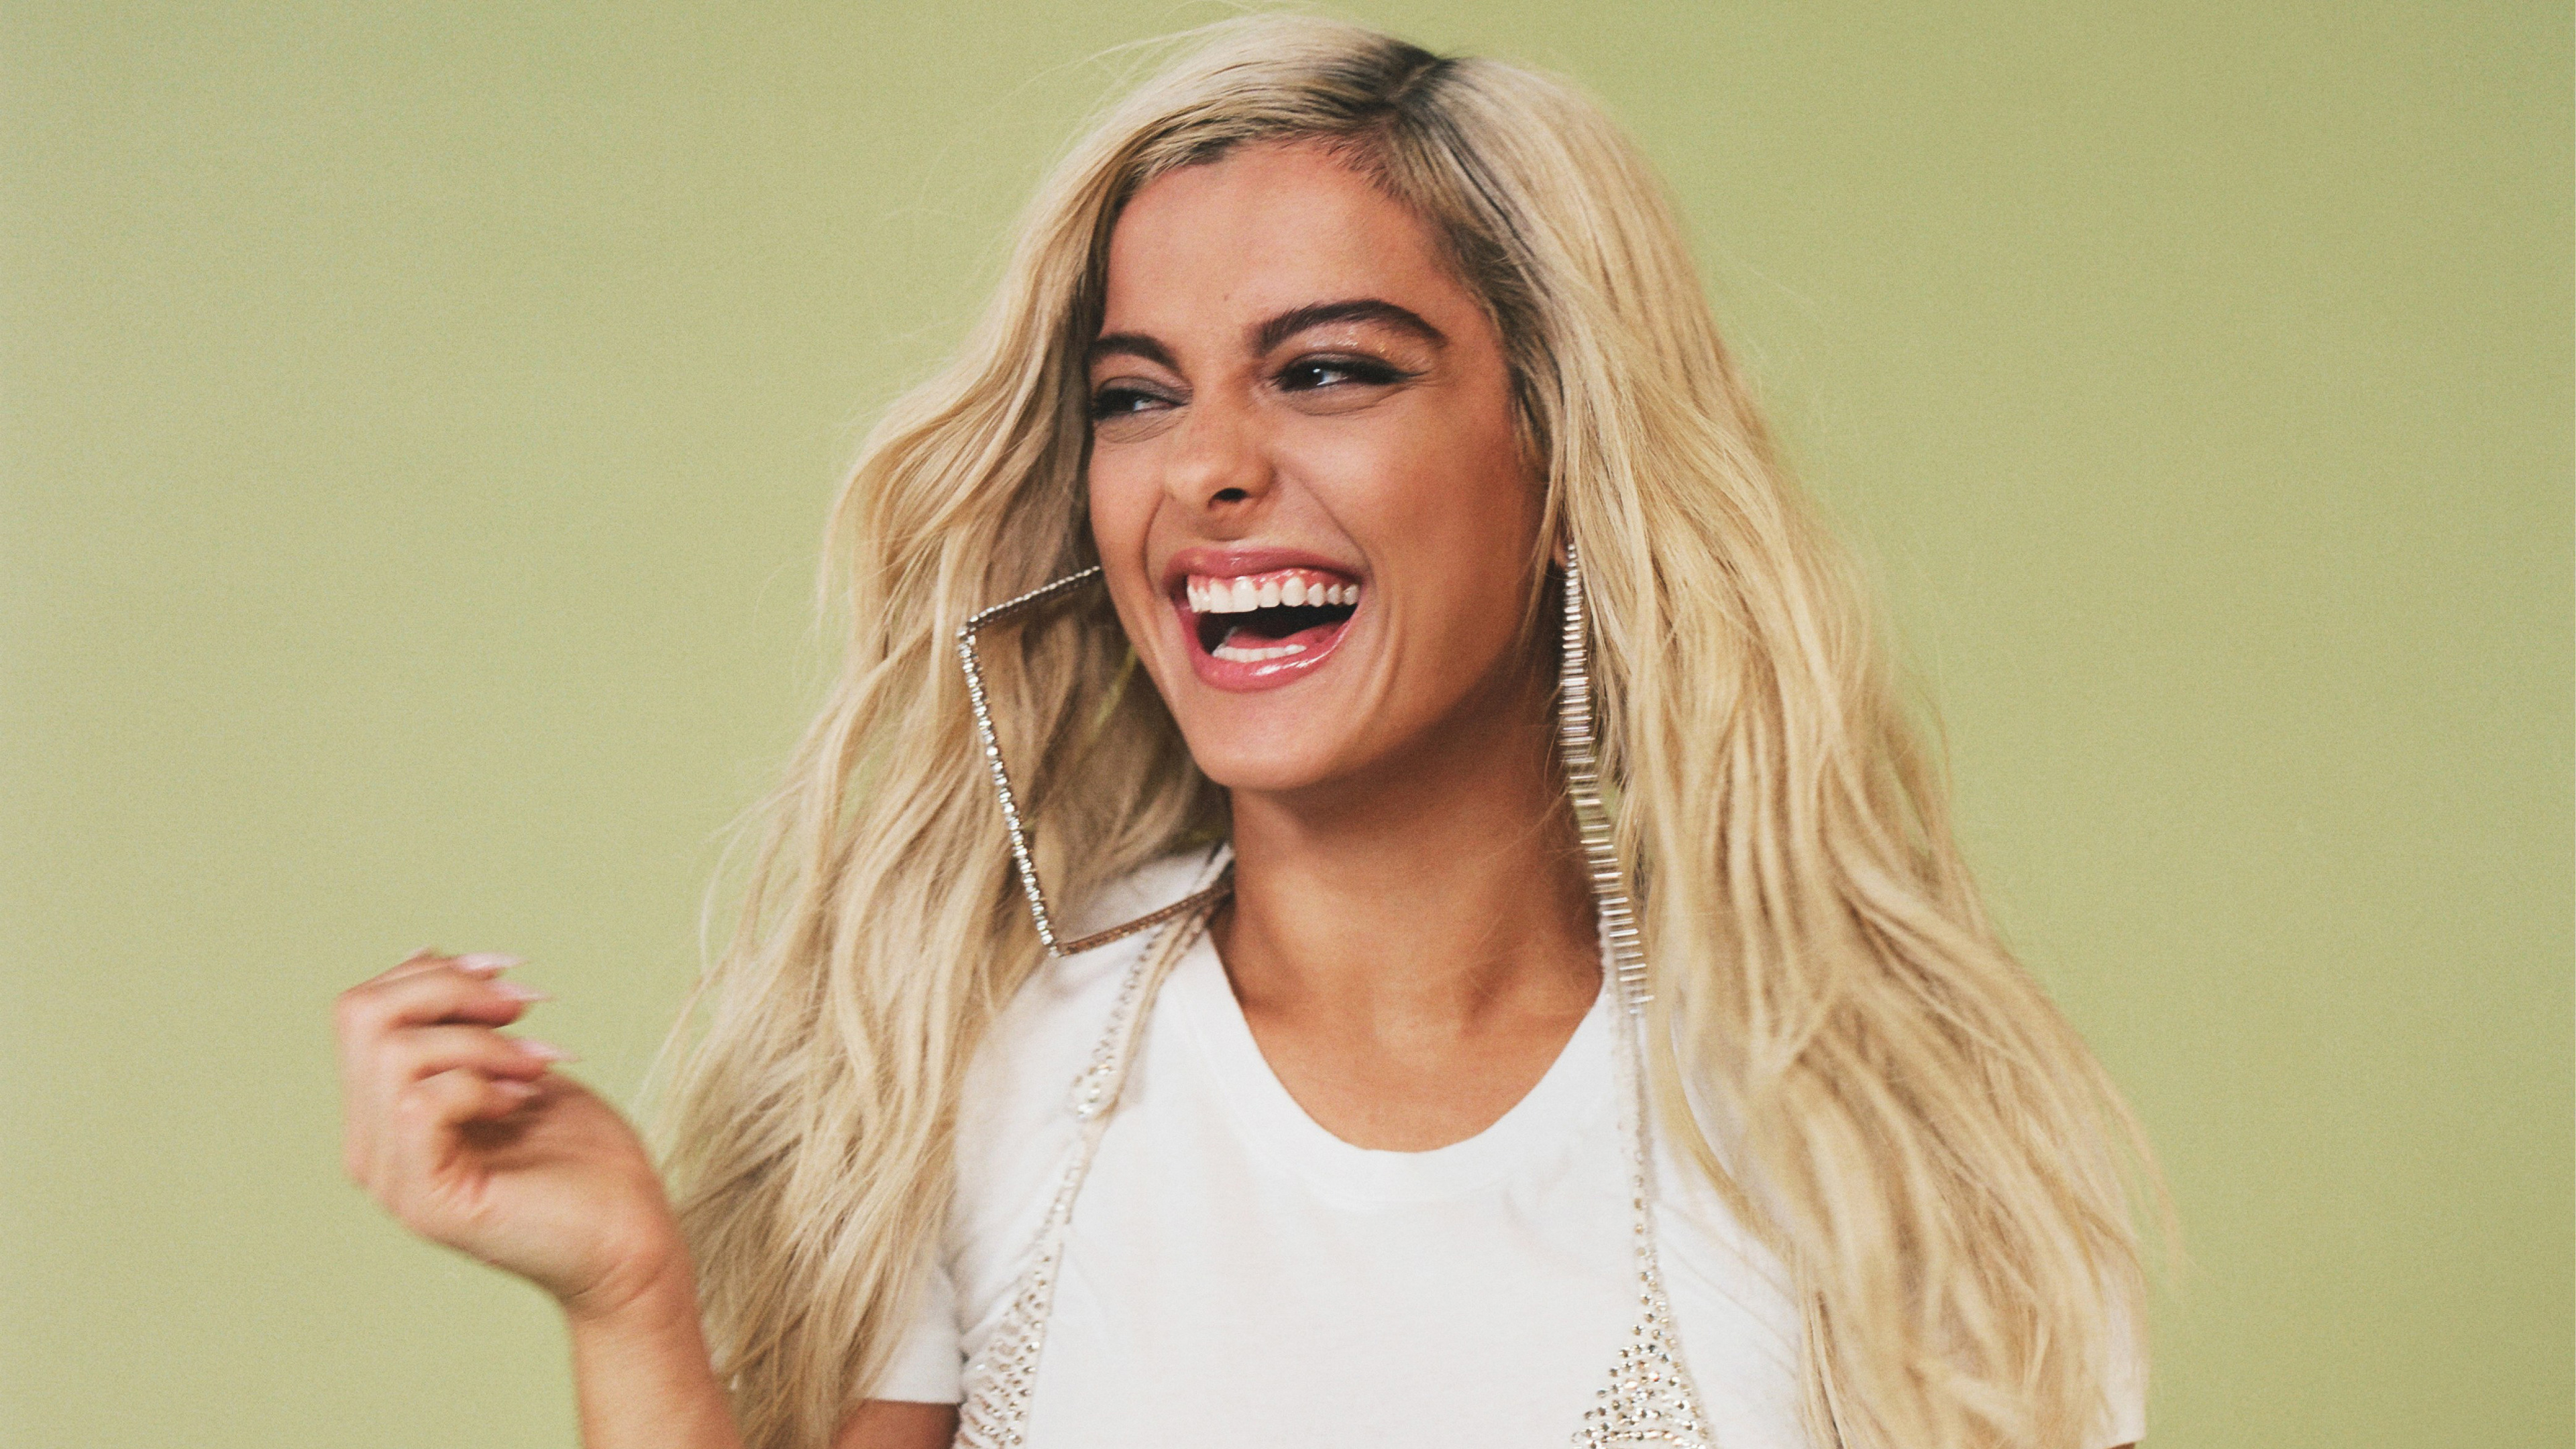 bebe rexha teen vogue 2019 1536948434 - Bebe Rexha Teen Vogue 2019 - singer wallpapers, music wallpapers, hd-wallpapers, girls wallpapers, bebe rexha wallpapers, 4k-wallpapers